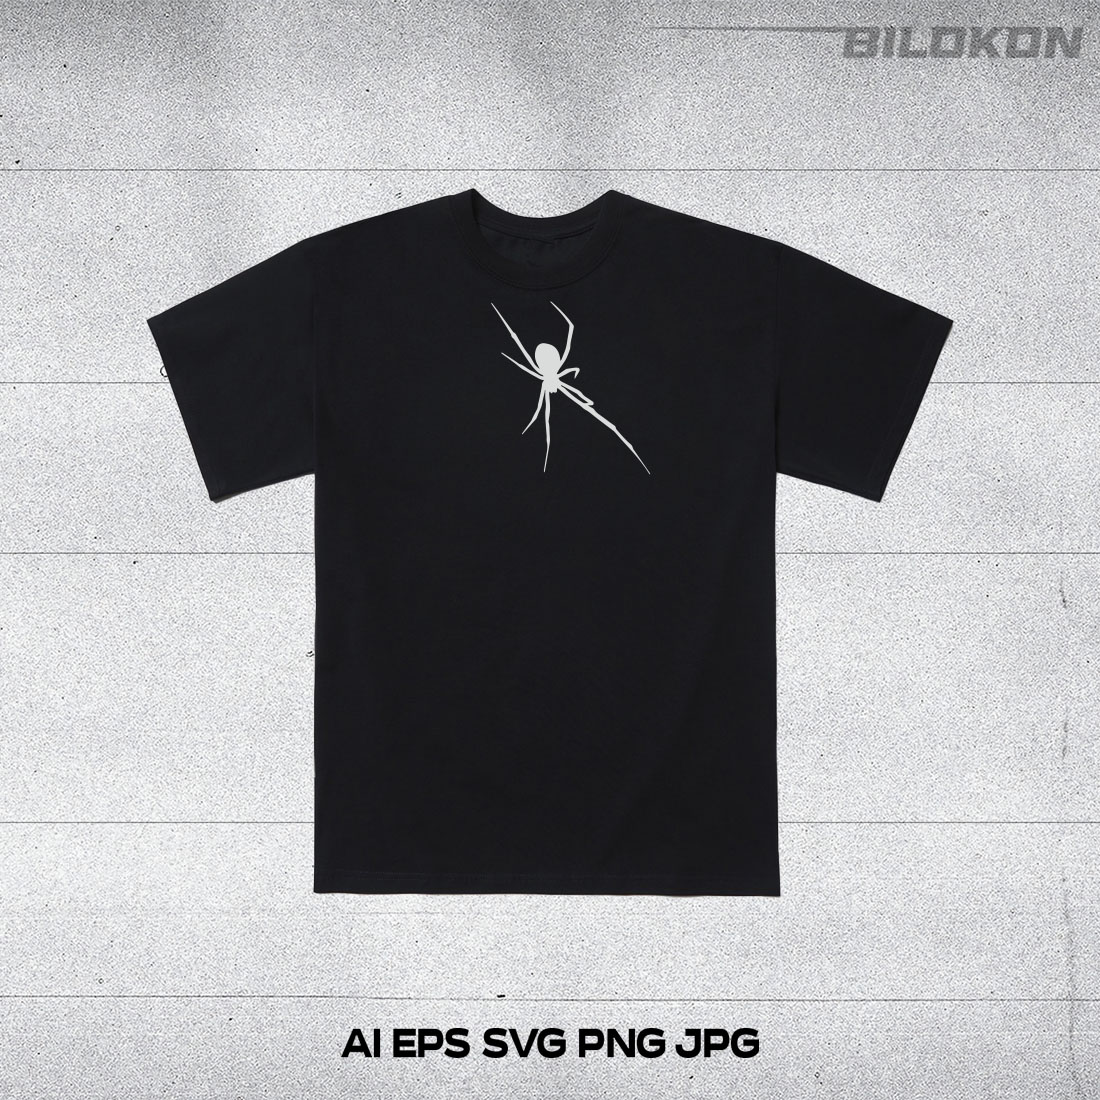 Black t - shirt with a spider on it.